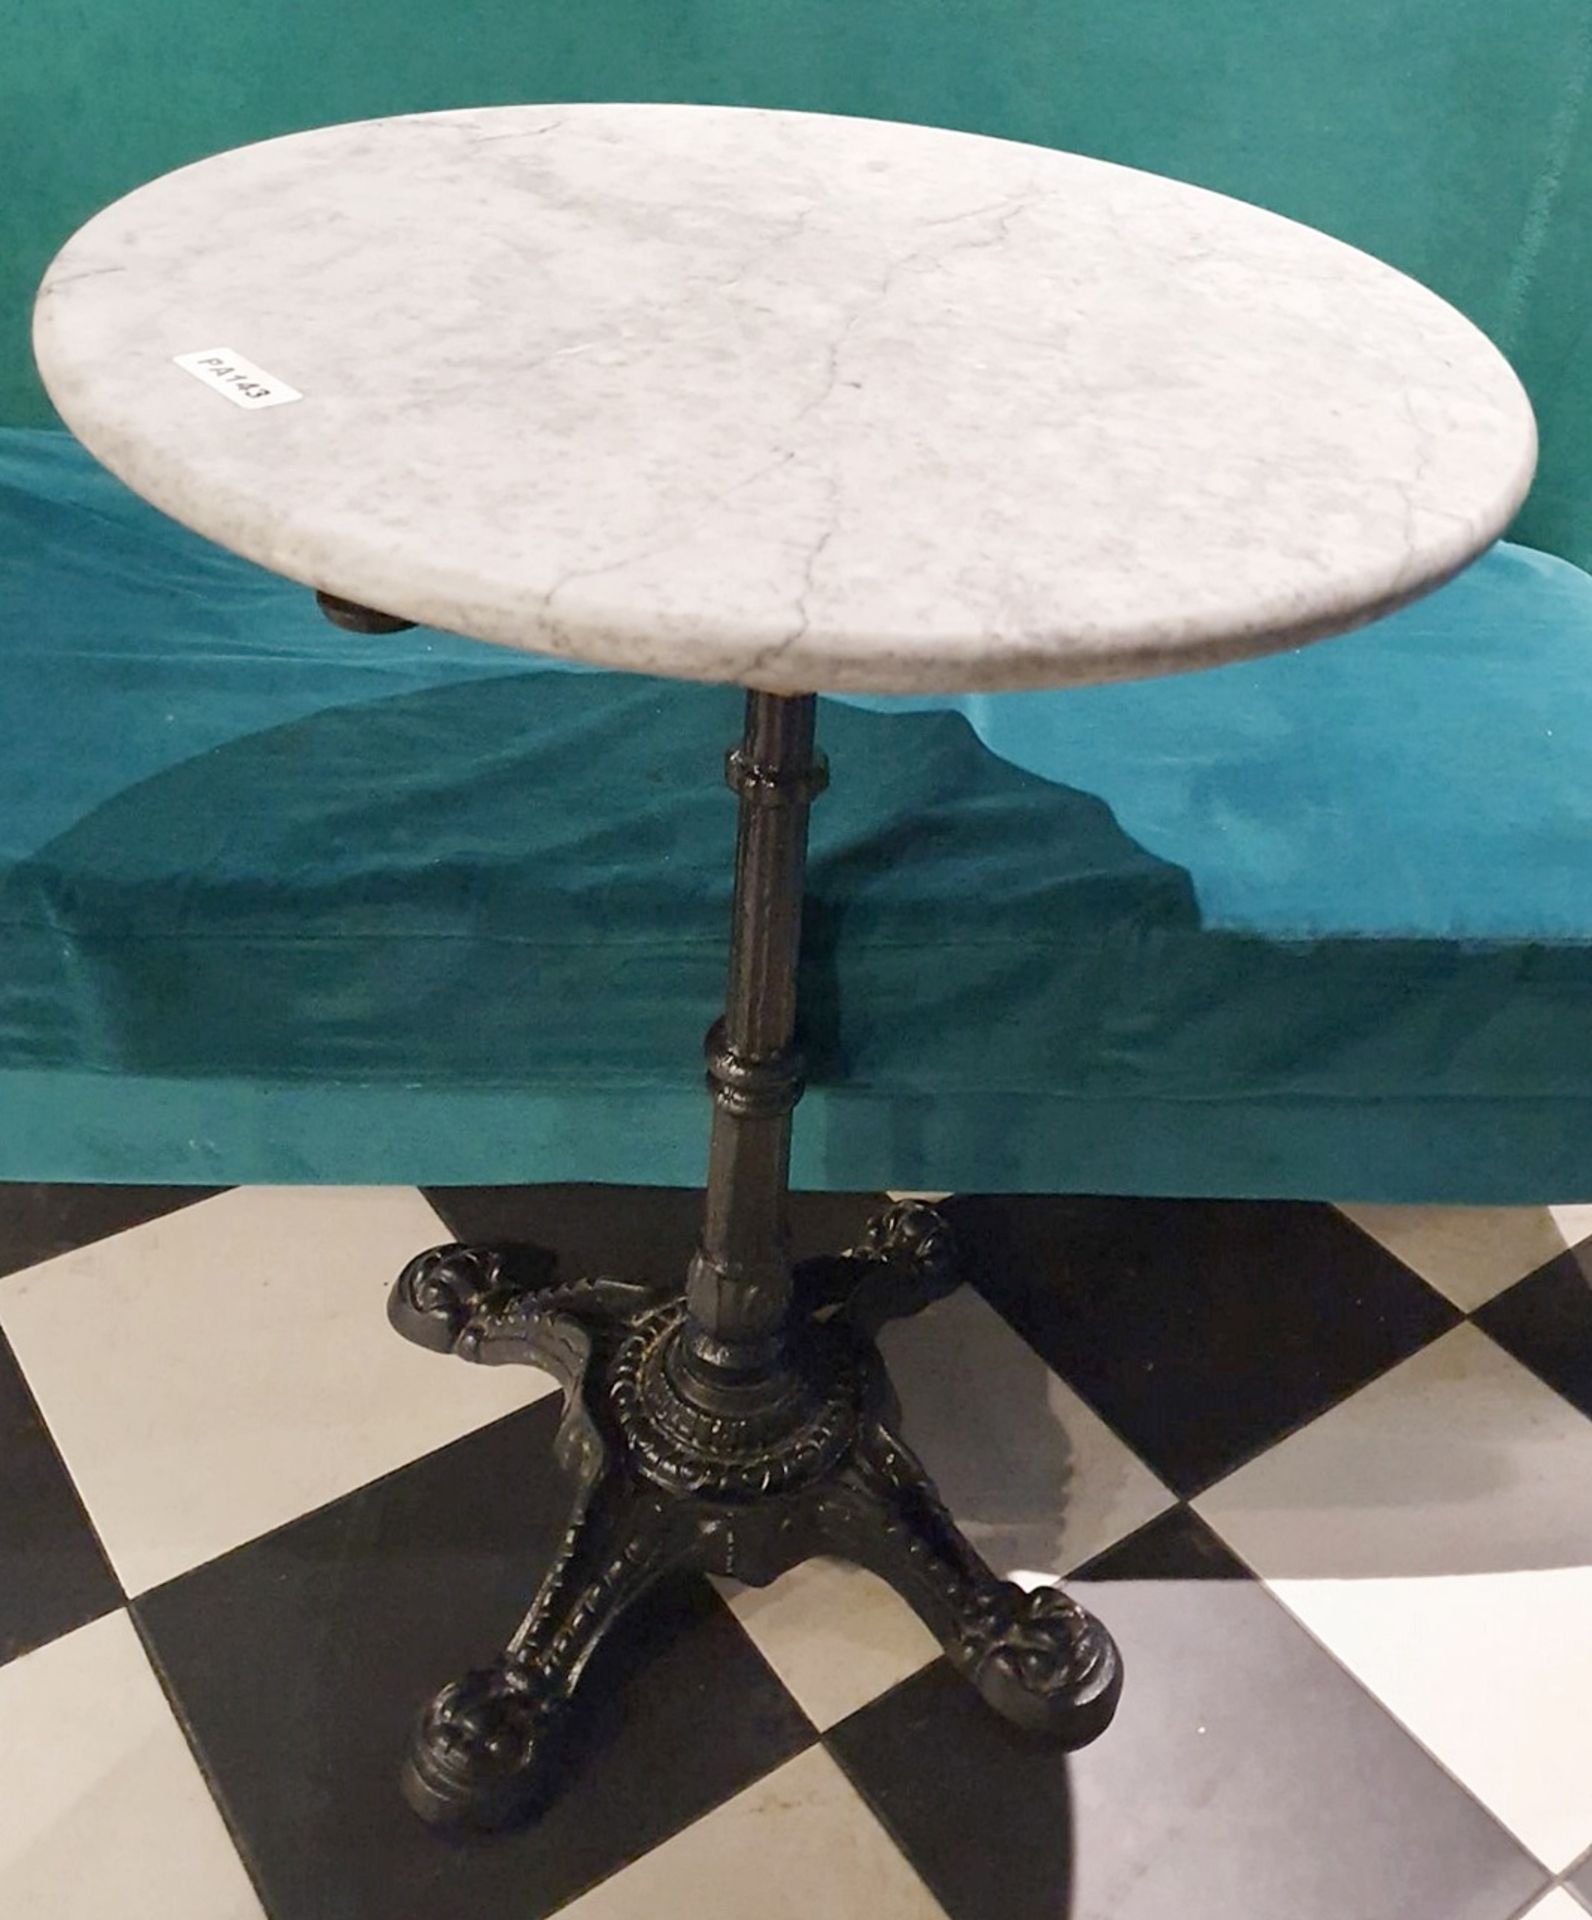 5 x Bistro Tables With Ornate Cast Iron Bases and White Marble Tops - H77 x W55 cms - Ref PA143 -